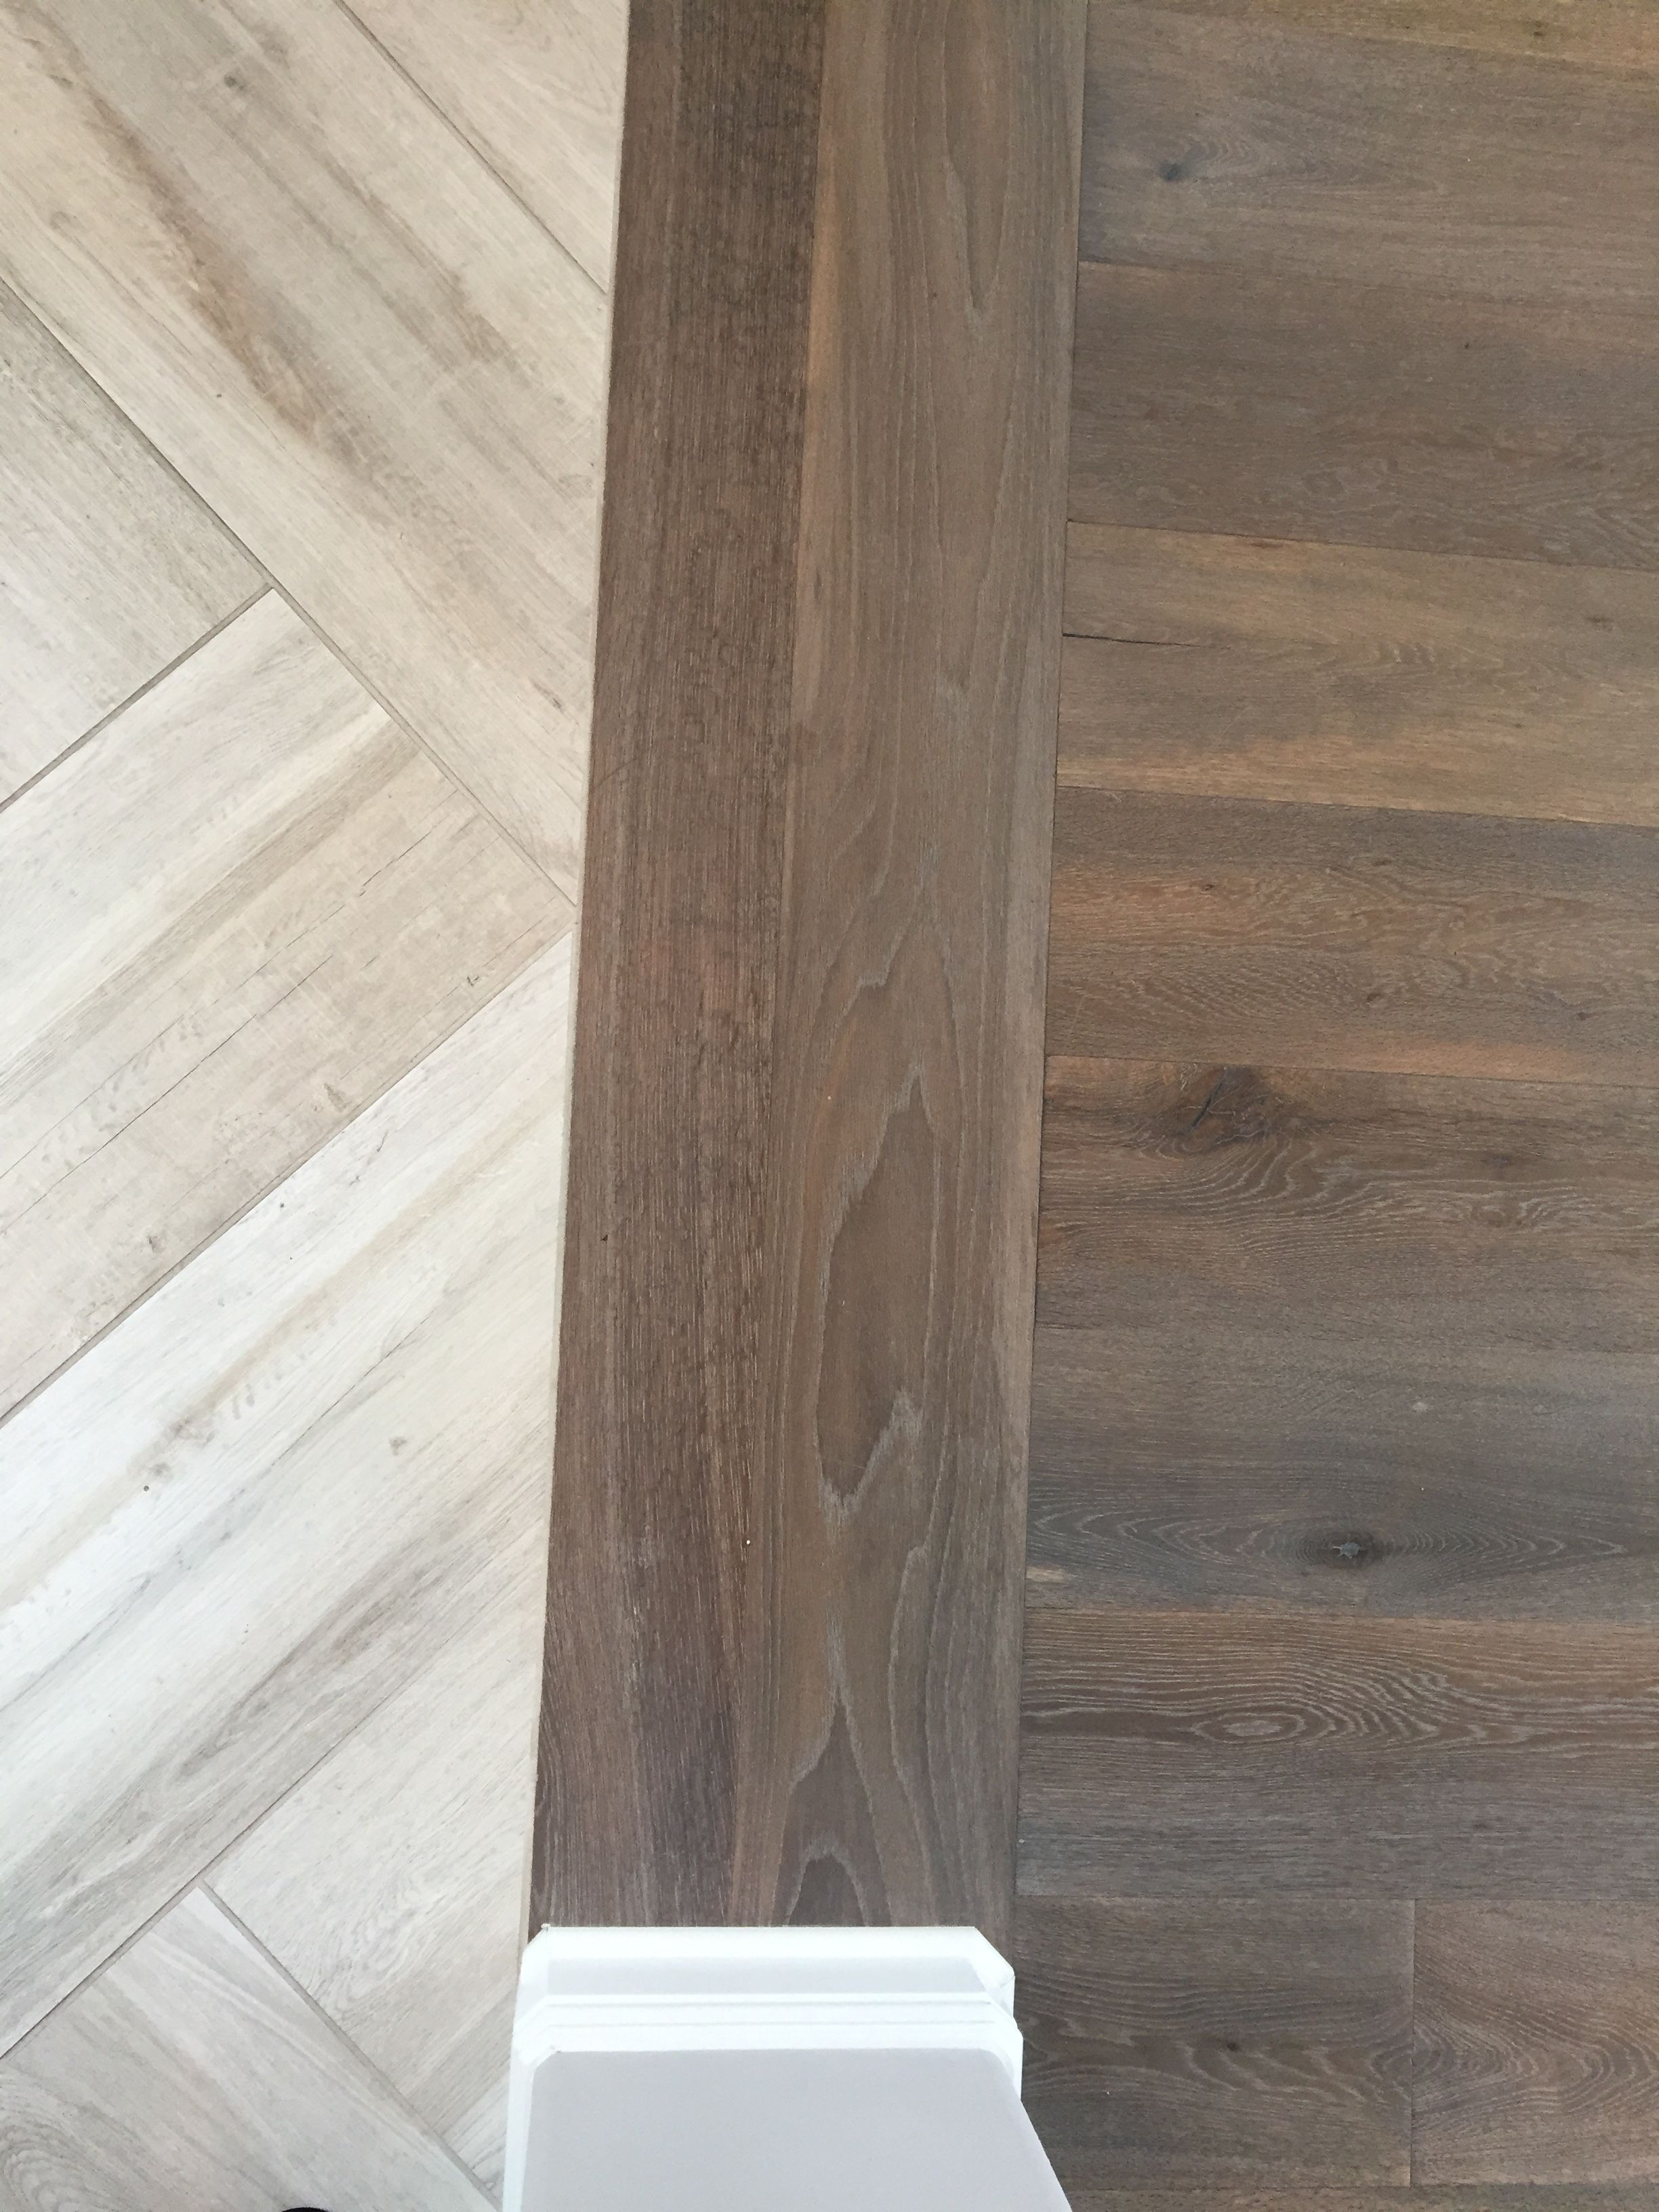 how to sand and refinish hardwood floors yourself of floor transition laminate to herringbone tile pattern model pertaining to floor transition laminate to herringbone tile pattern herringbone tile pattern herringbone wood floor